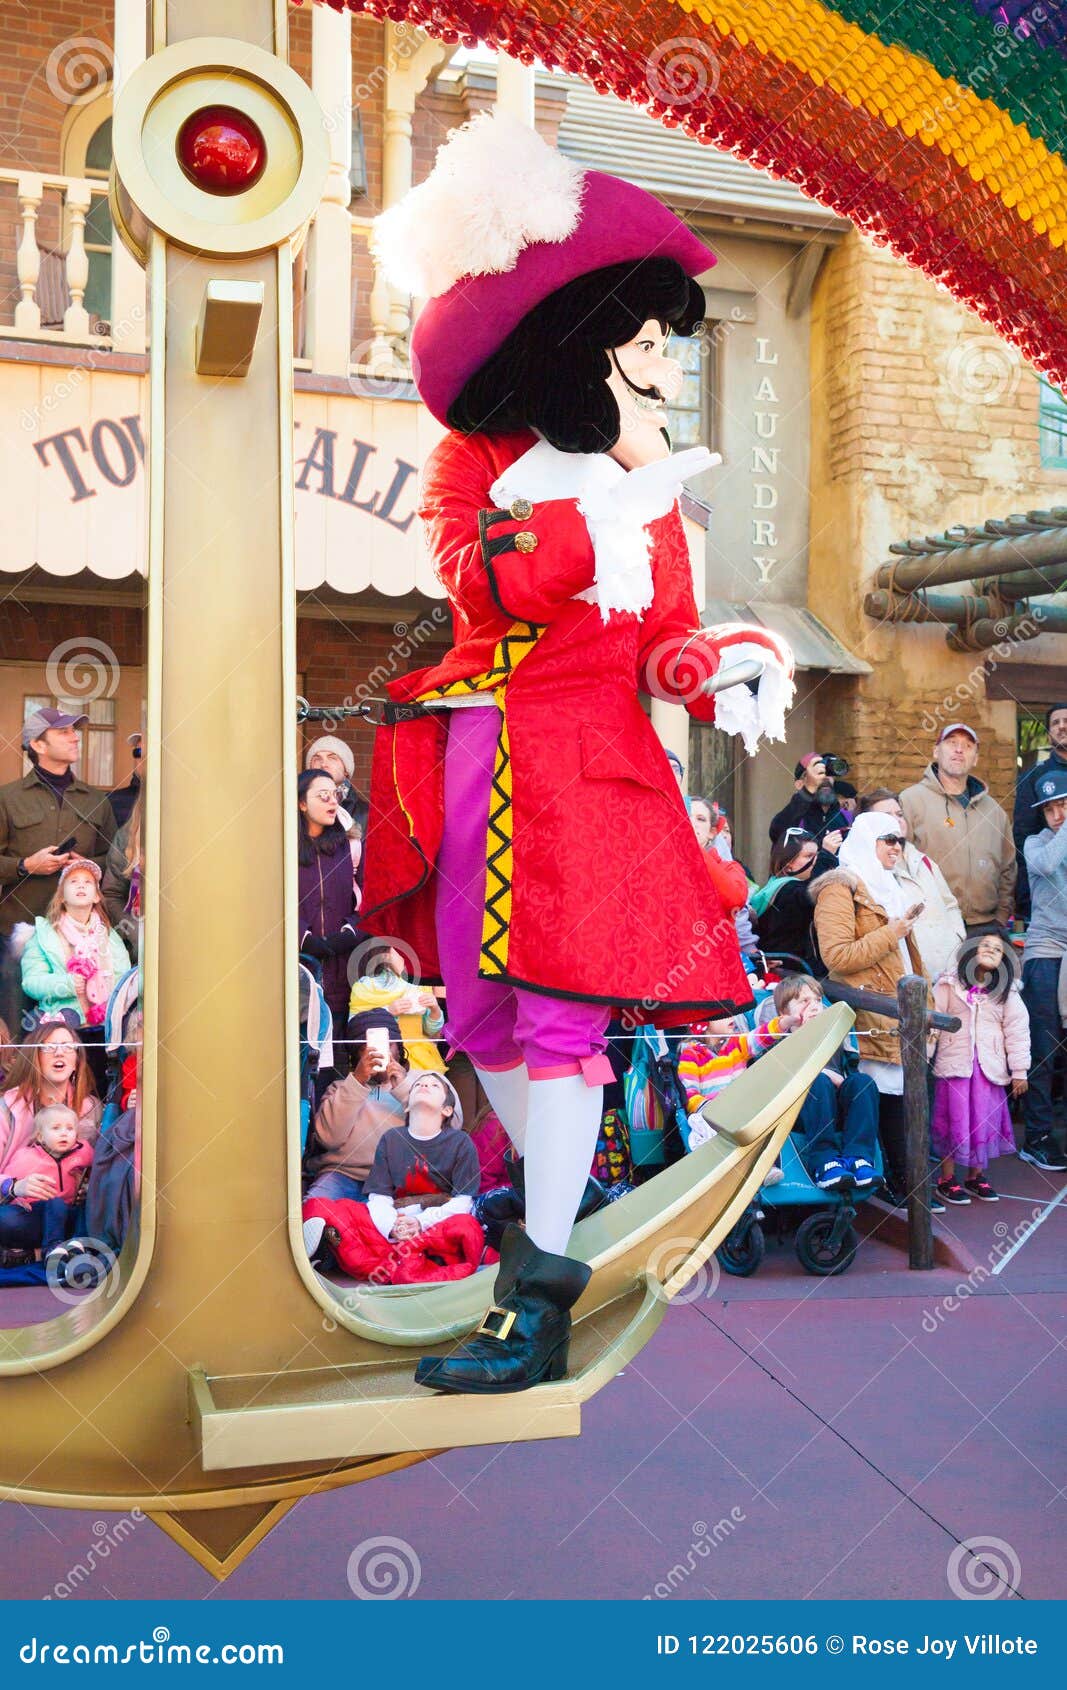 Disney Character, Captain Hook Editorial Photo - Image of captain